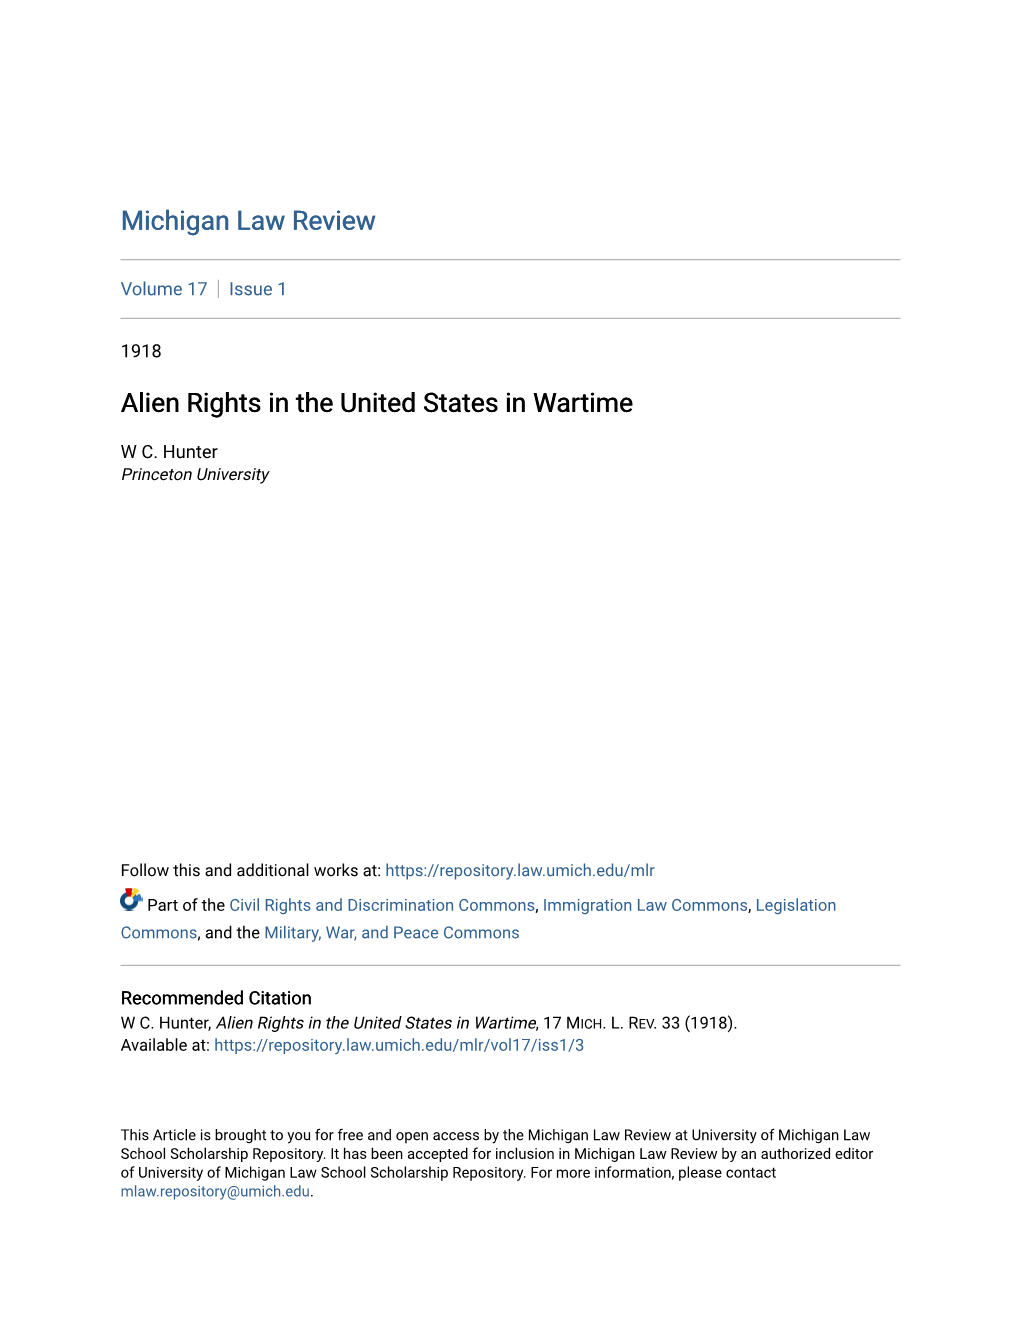 Alien Rights in the United States in Wartime